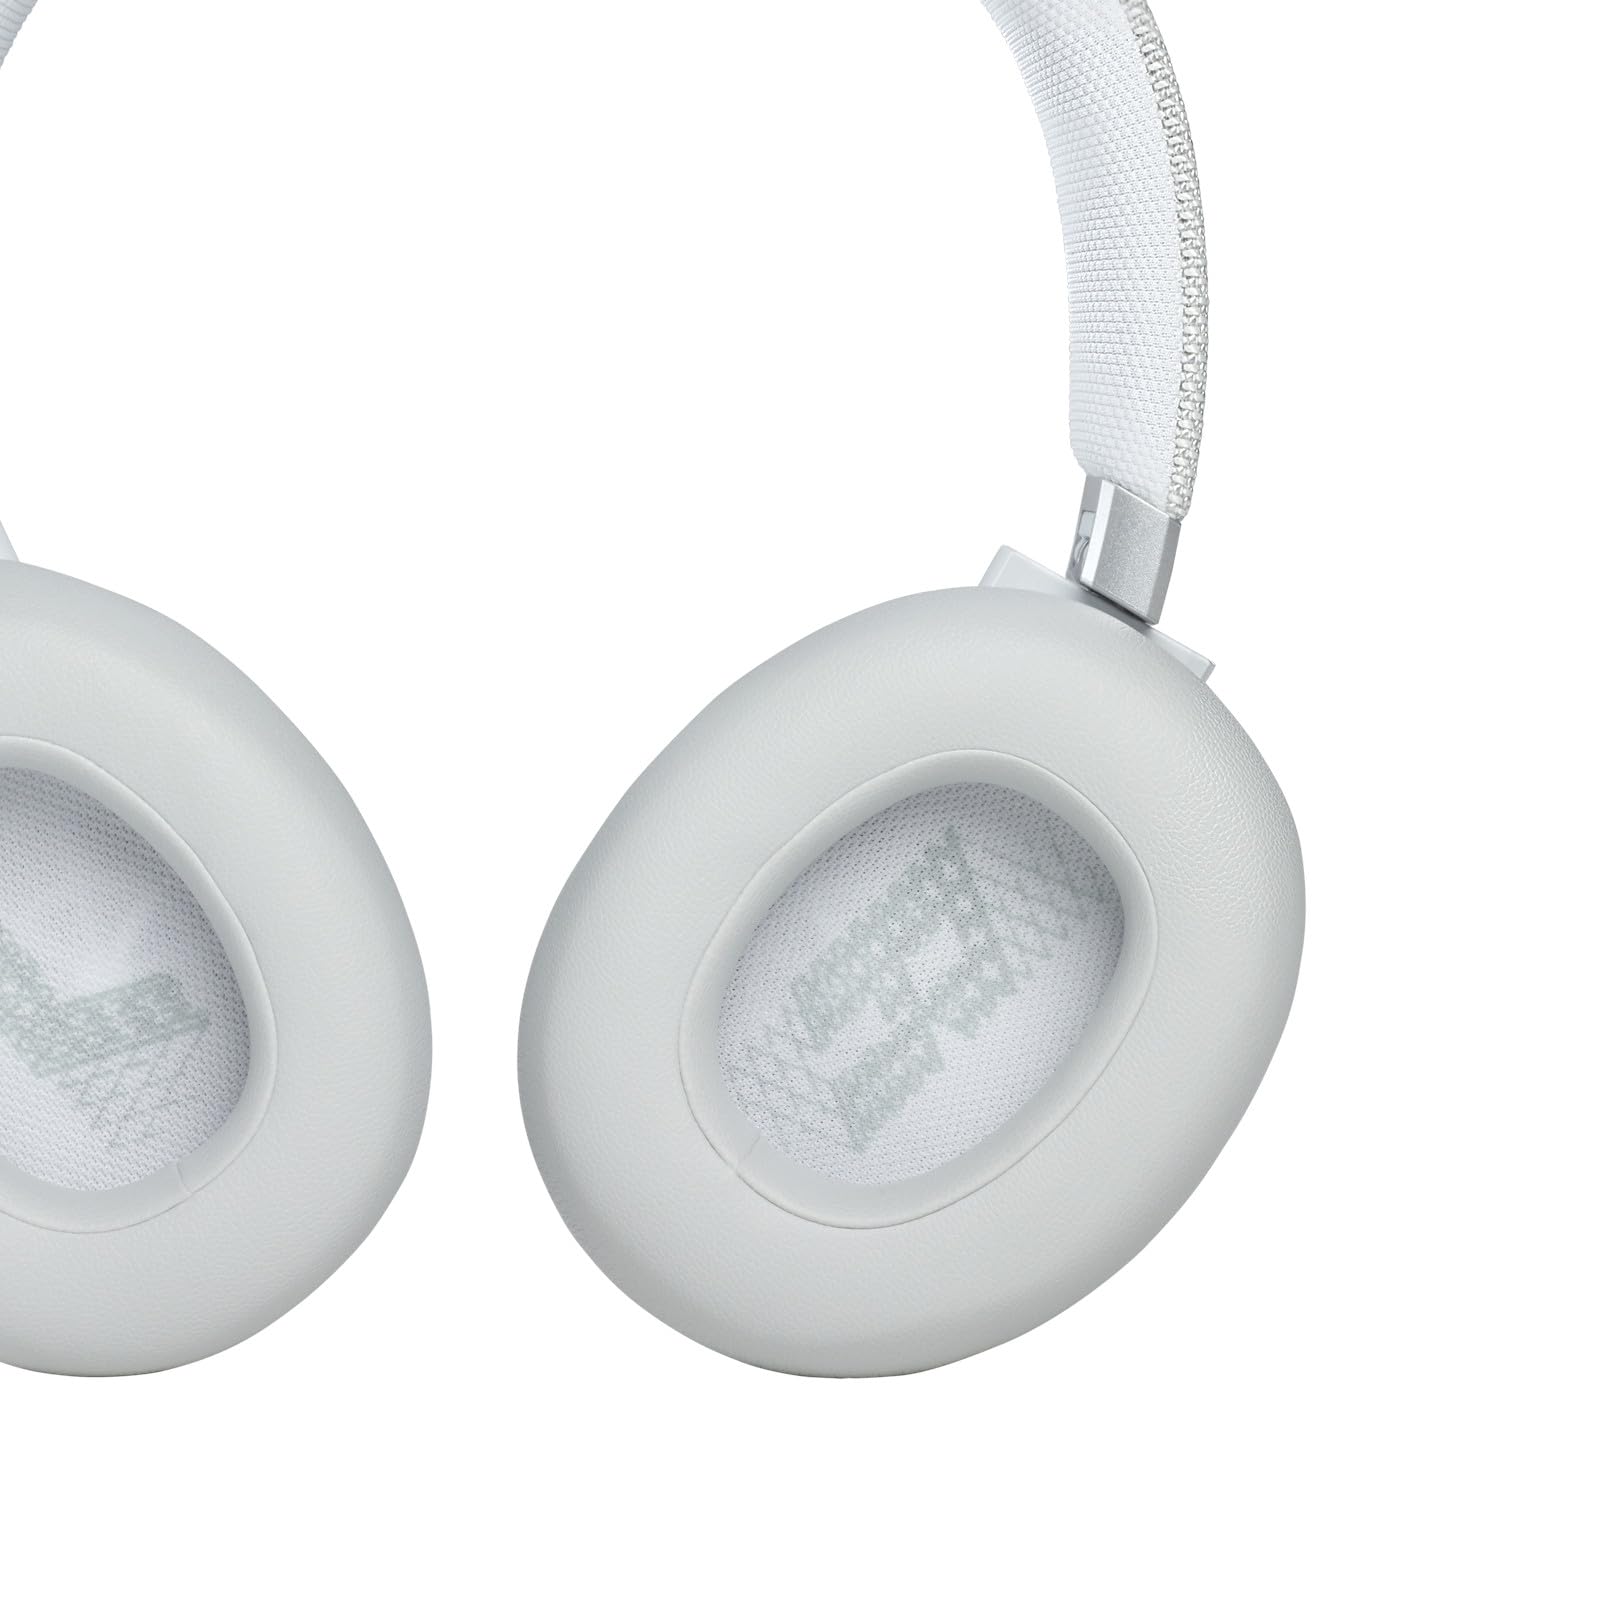 JBL Live 660NC - Wireless Over-Ear Noise Cancelling Headphones with Long Lasting Battery and Voice Assistant - White, Medium